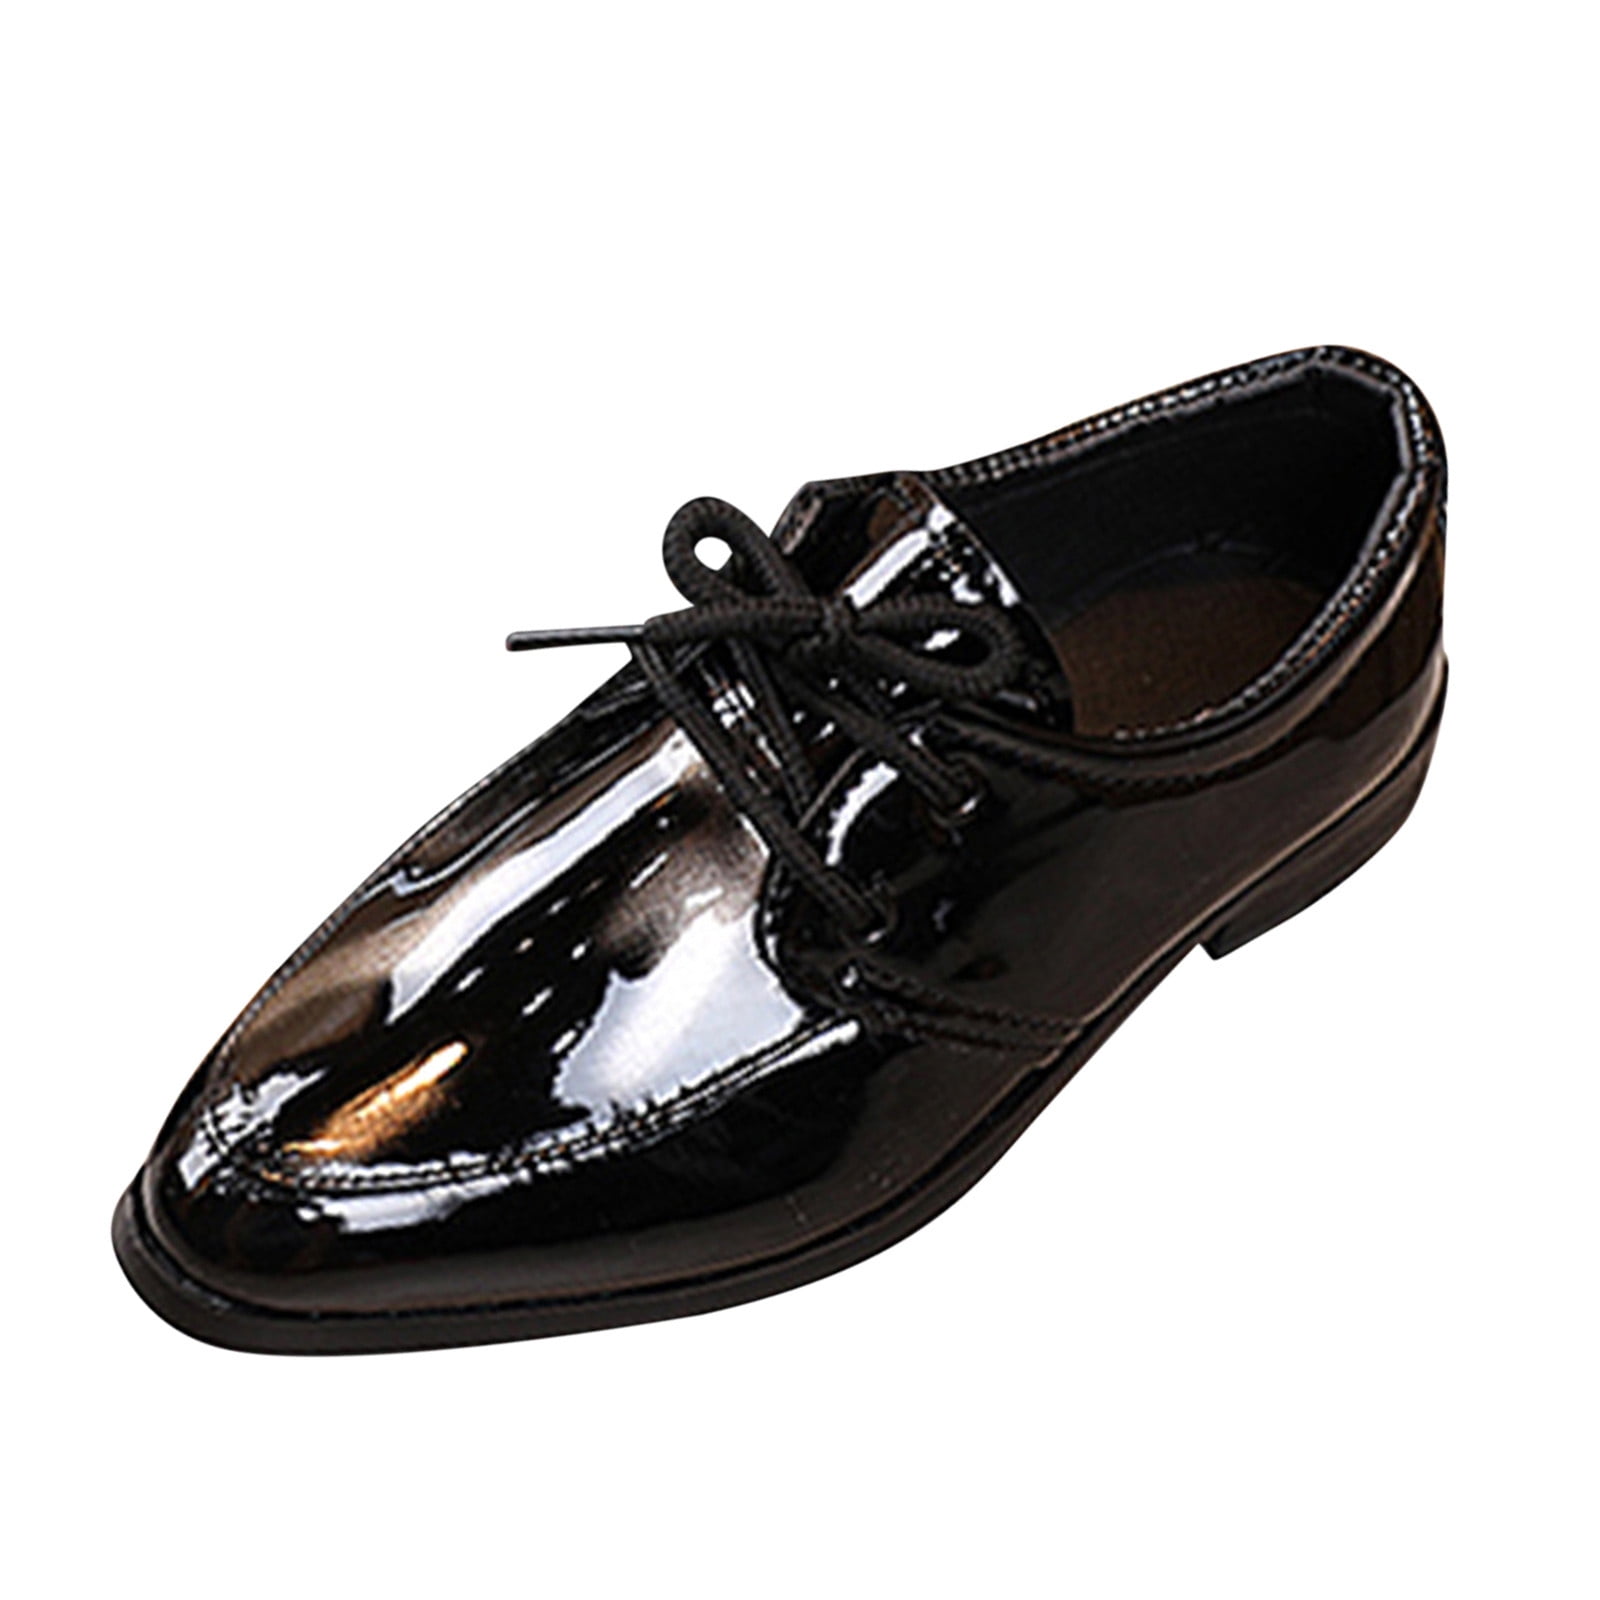 Details about   British Mens Dress Formal Faux Leather Shoes Pointy Toe Floral Party Nightclub D 